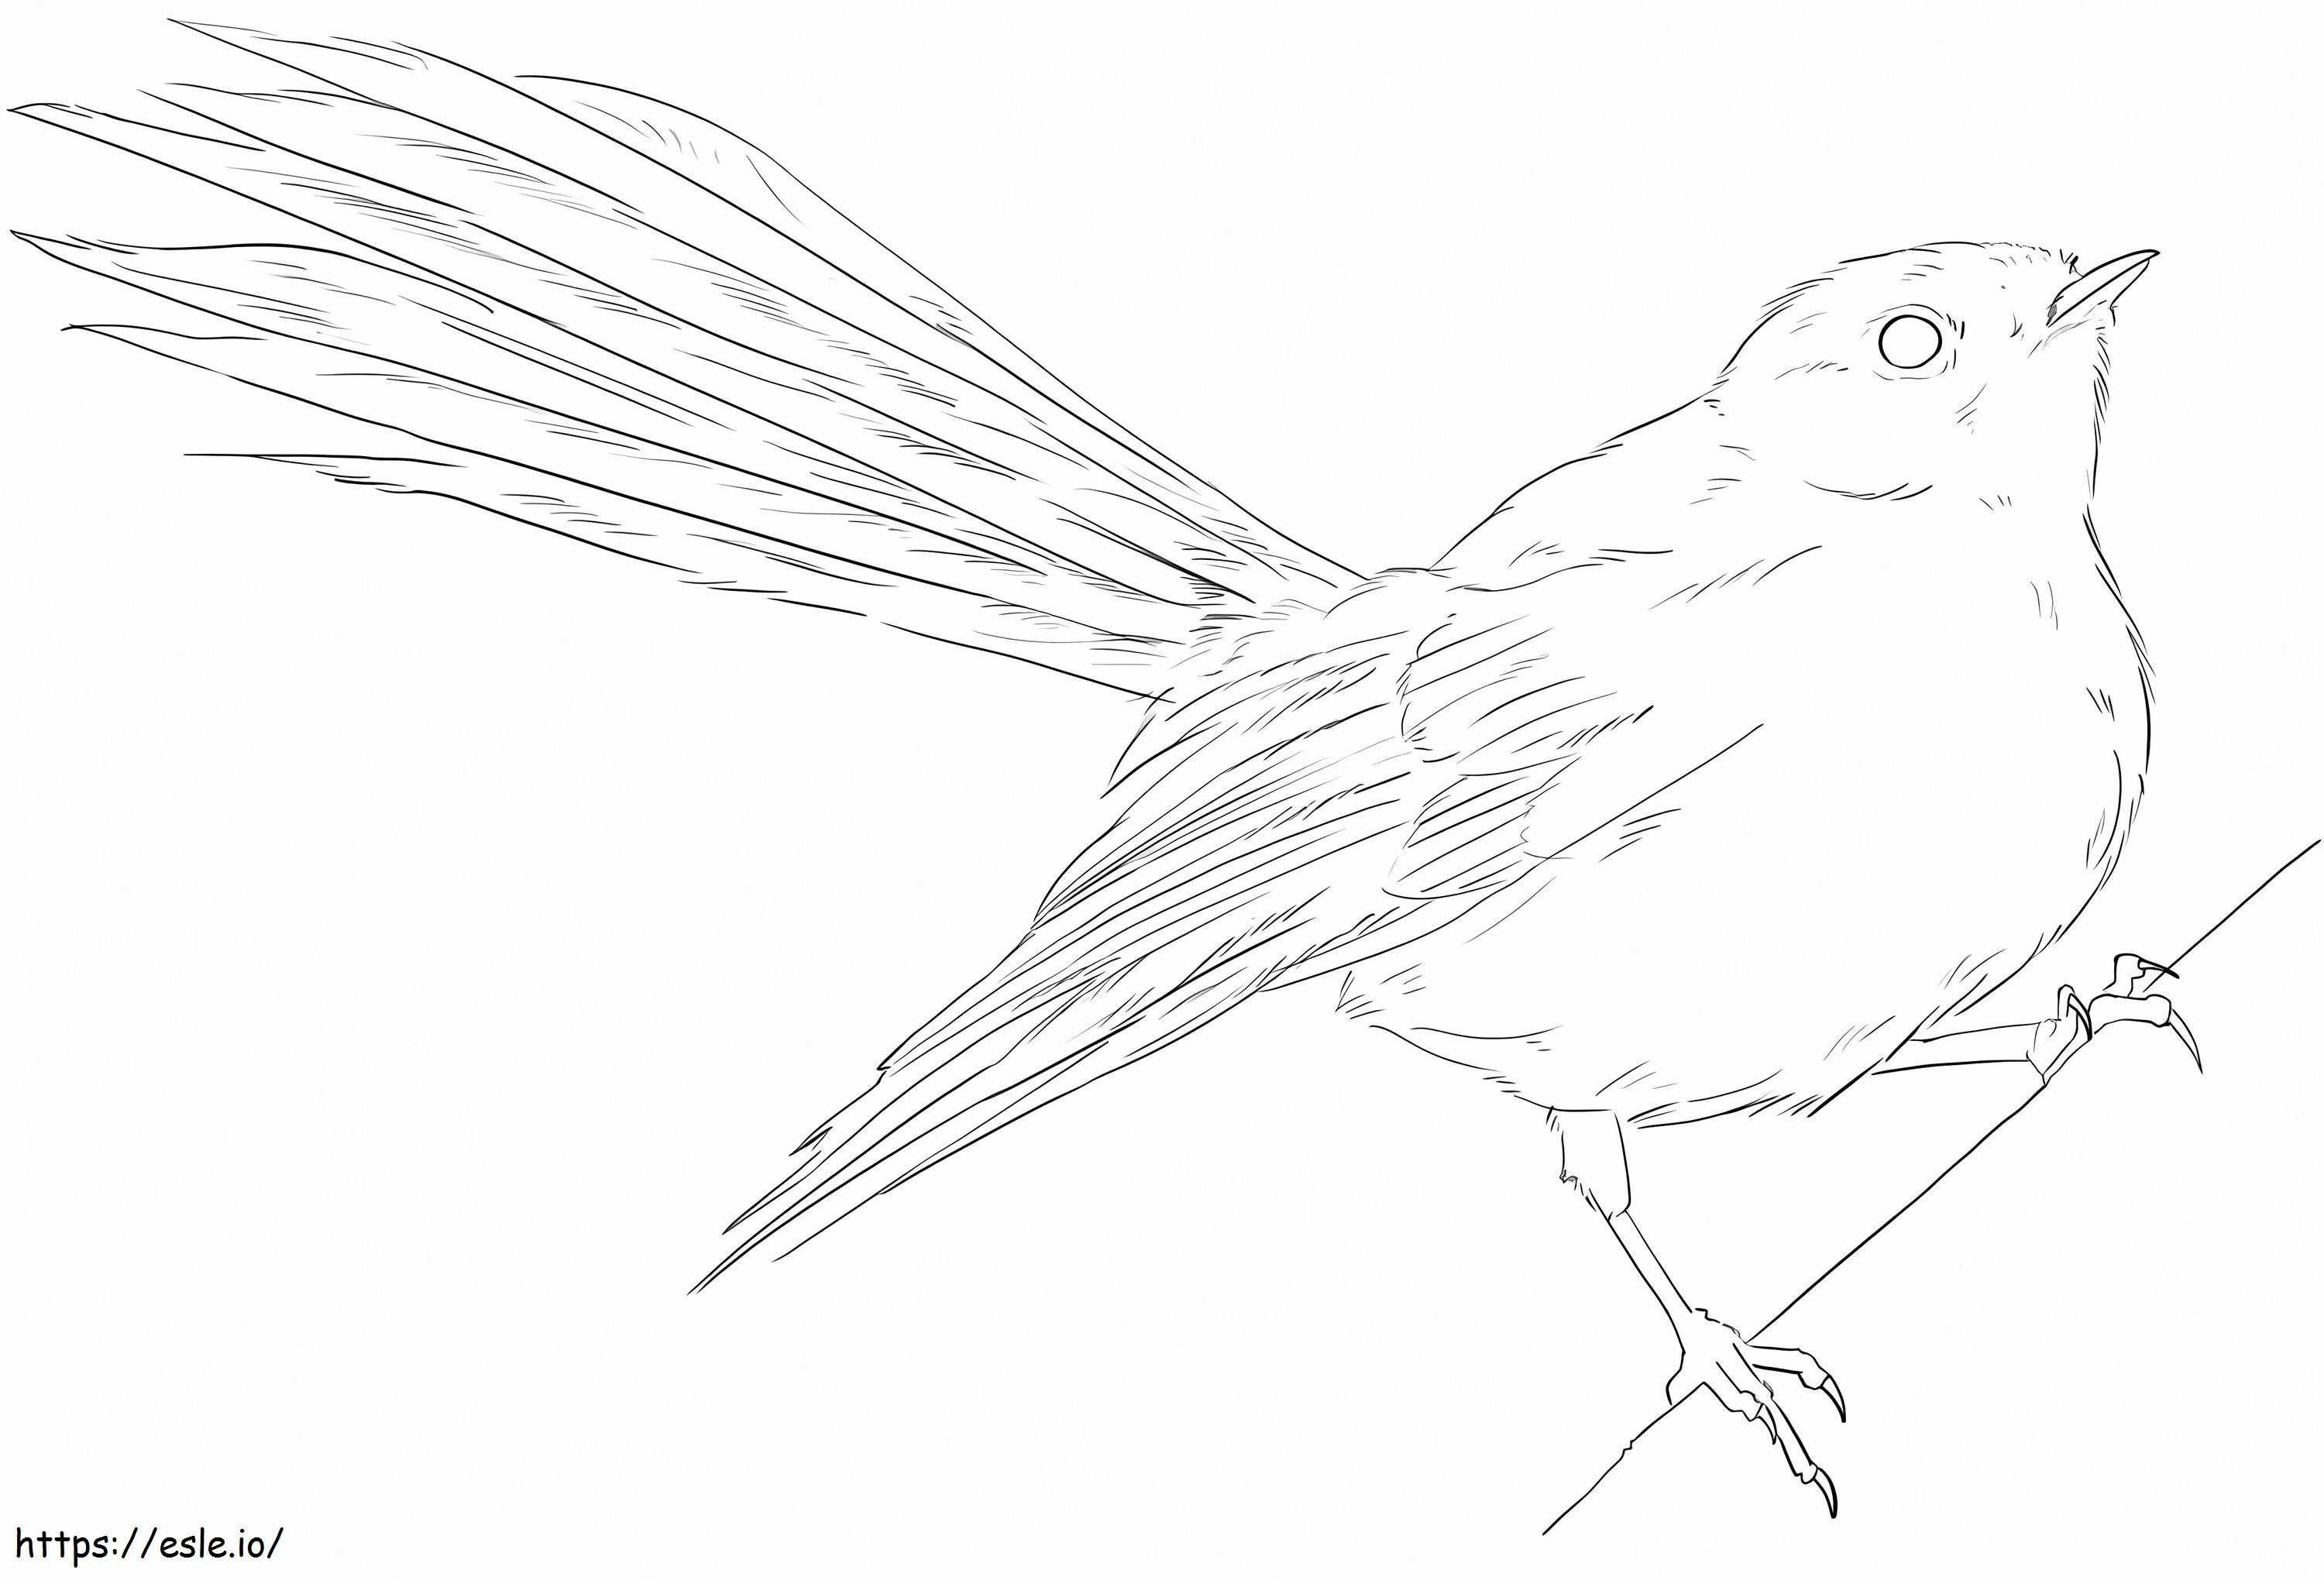 Black Fantail coloring page